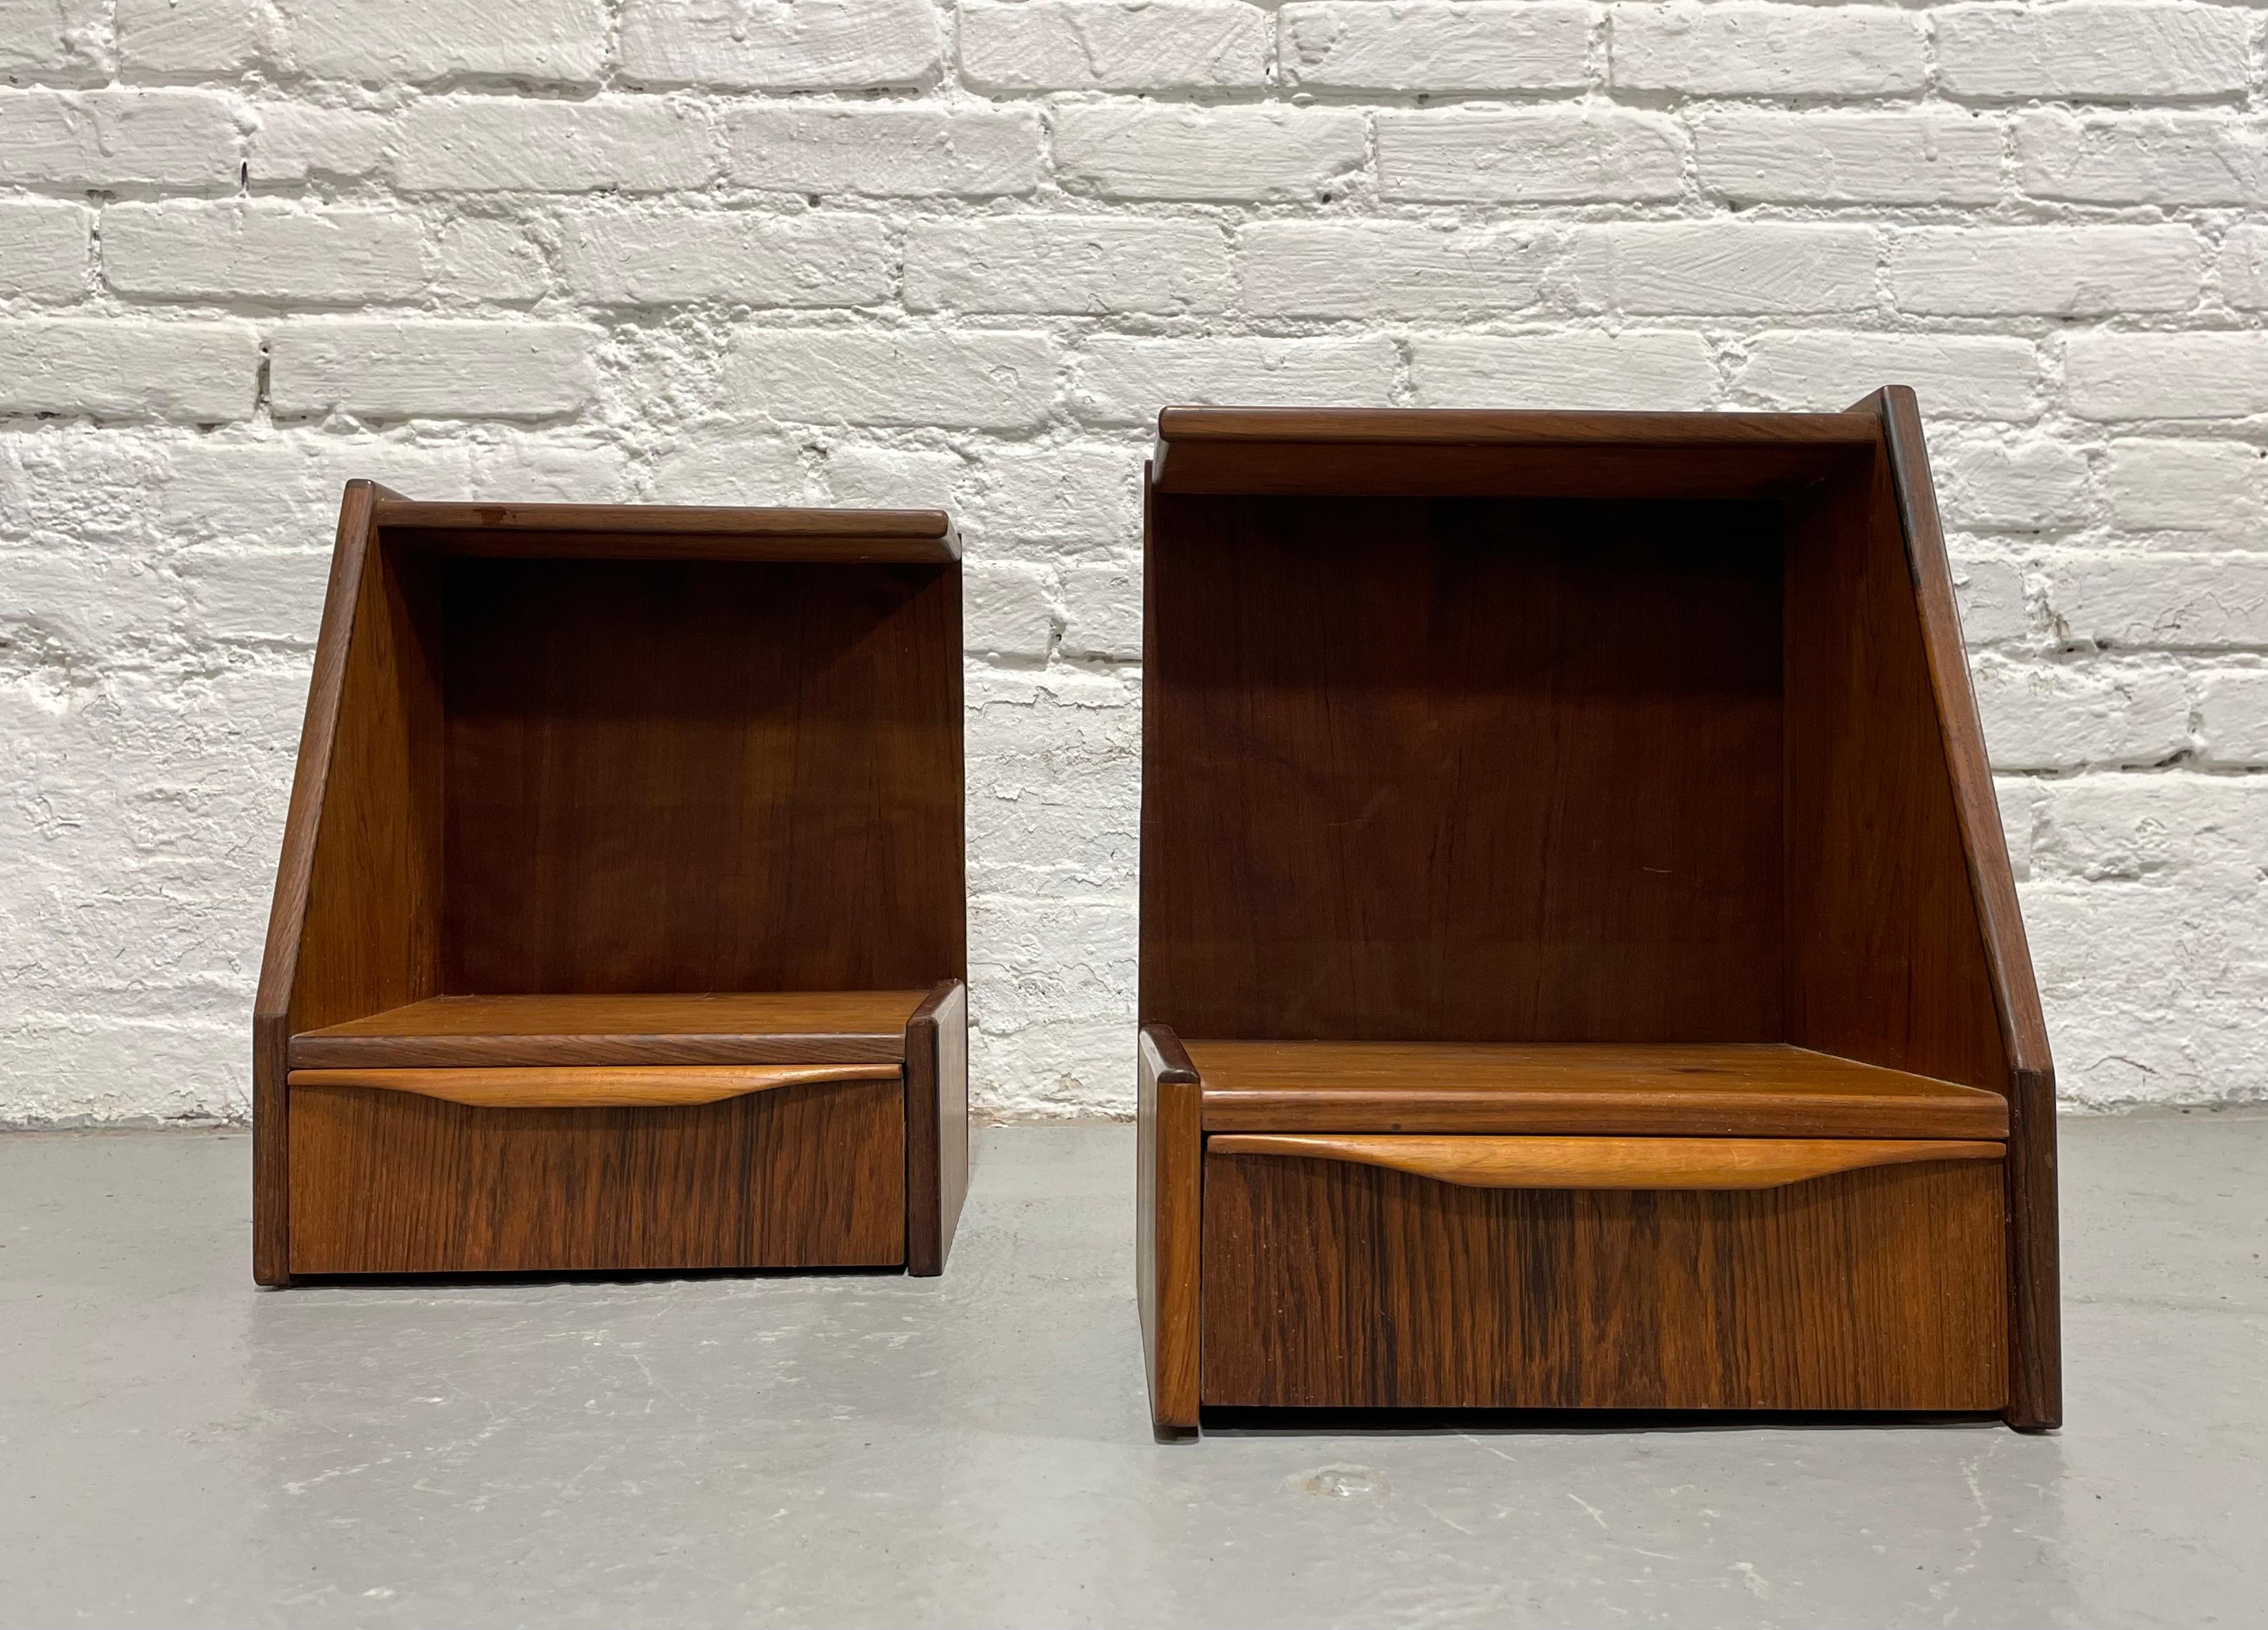 Petite pair of Danish Mid Century Modern Rosewood Hanging Nightstands / Bedside Tables, c. 1960's.  This set is perfect where space is limited as the nightstands will be affixed to your wall rather than taking up floor space.  This pair is a rare